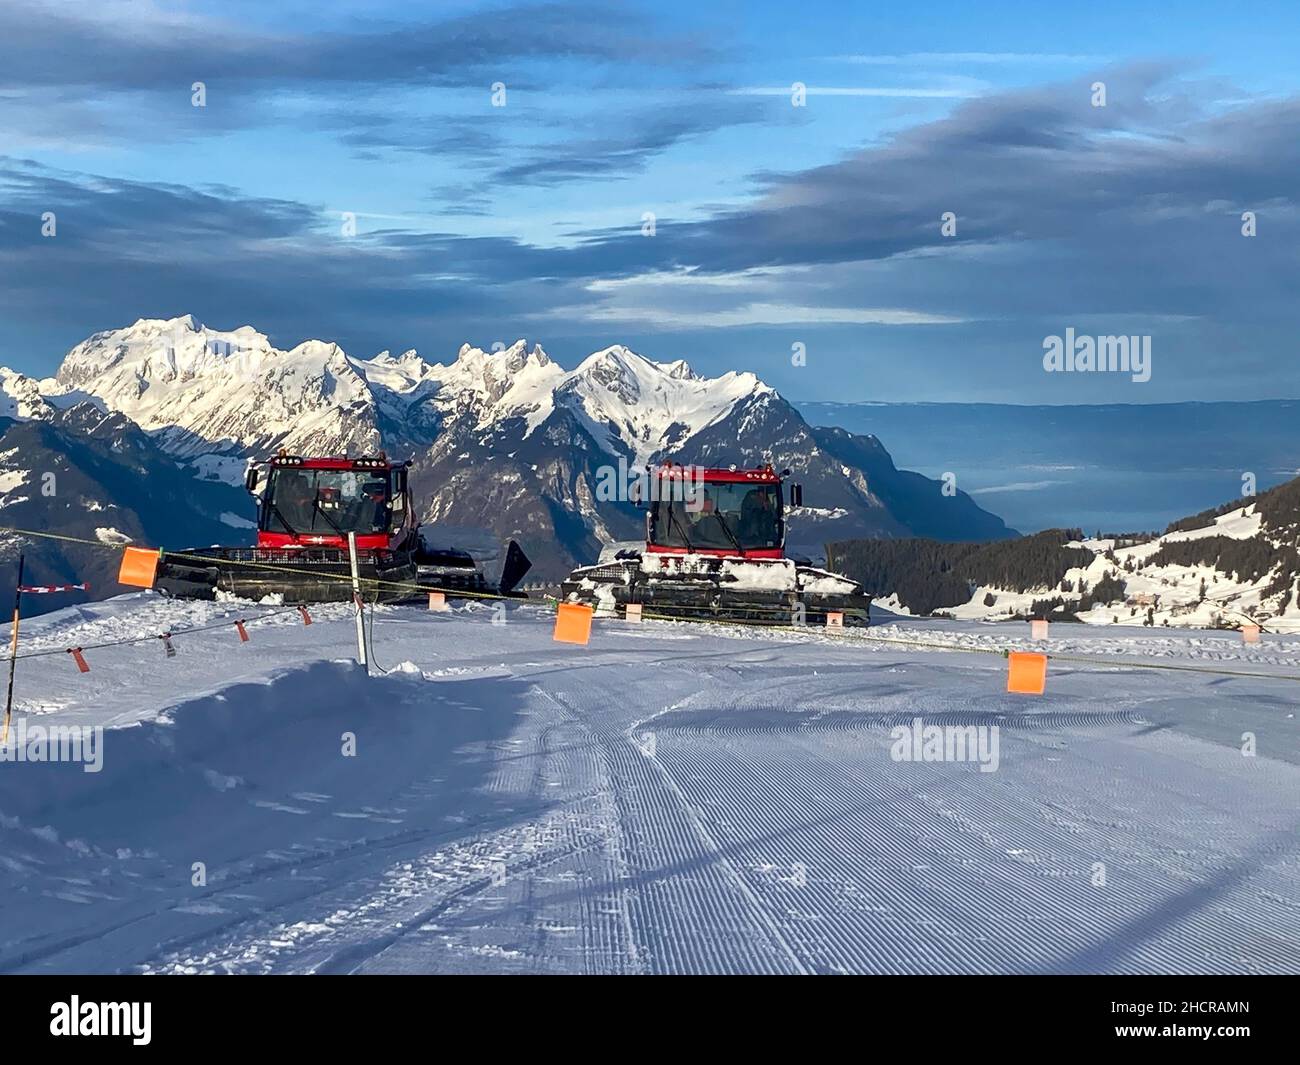 Villars sur Ollon, Switzerland - 04. February 2021: Two Pistenbully in the Mountain Landscape after preparing the Slopes Stock Photo